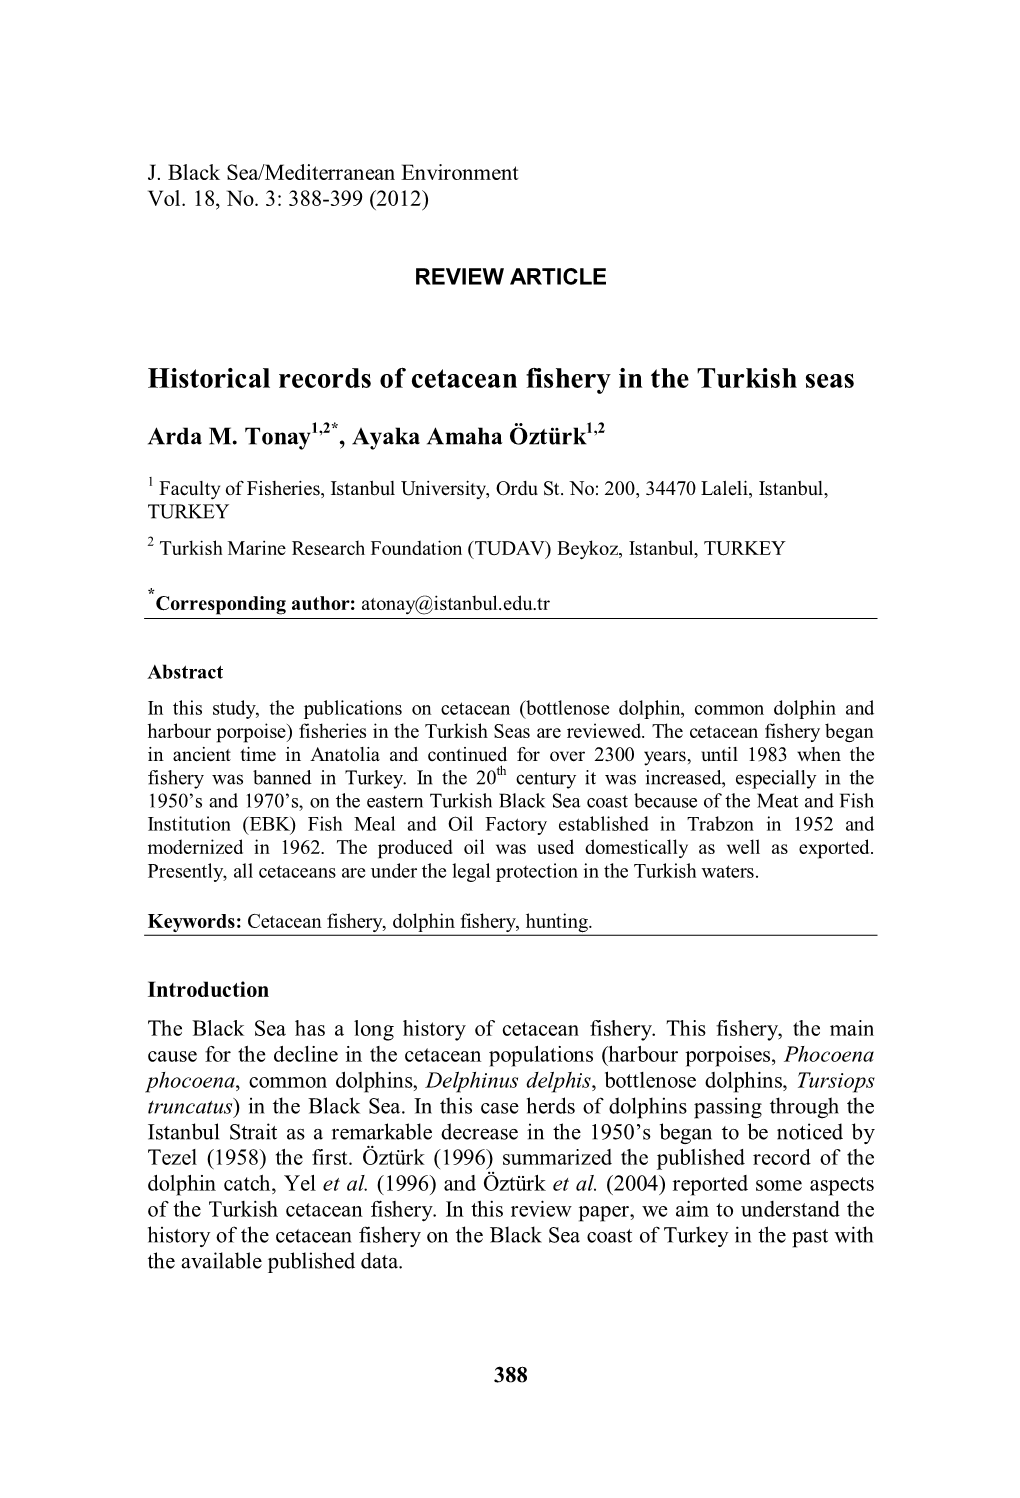 Historical Records of Cetacean Fishery in the Turkish Seas